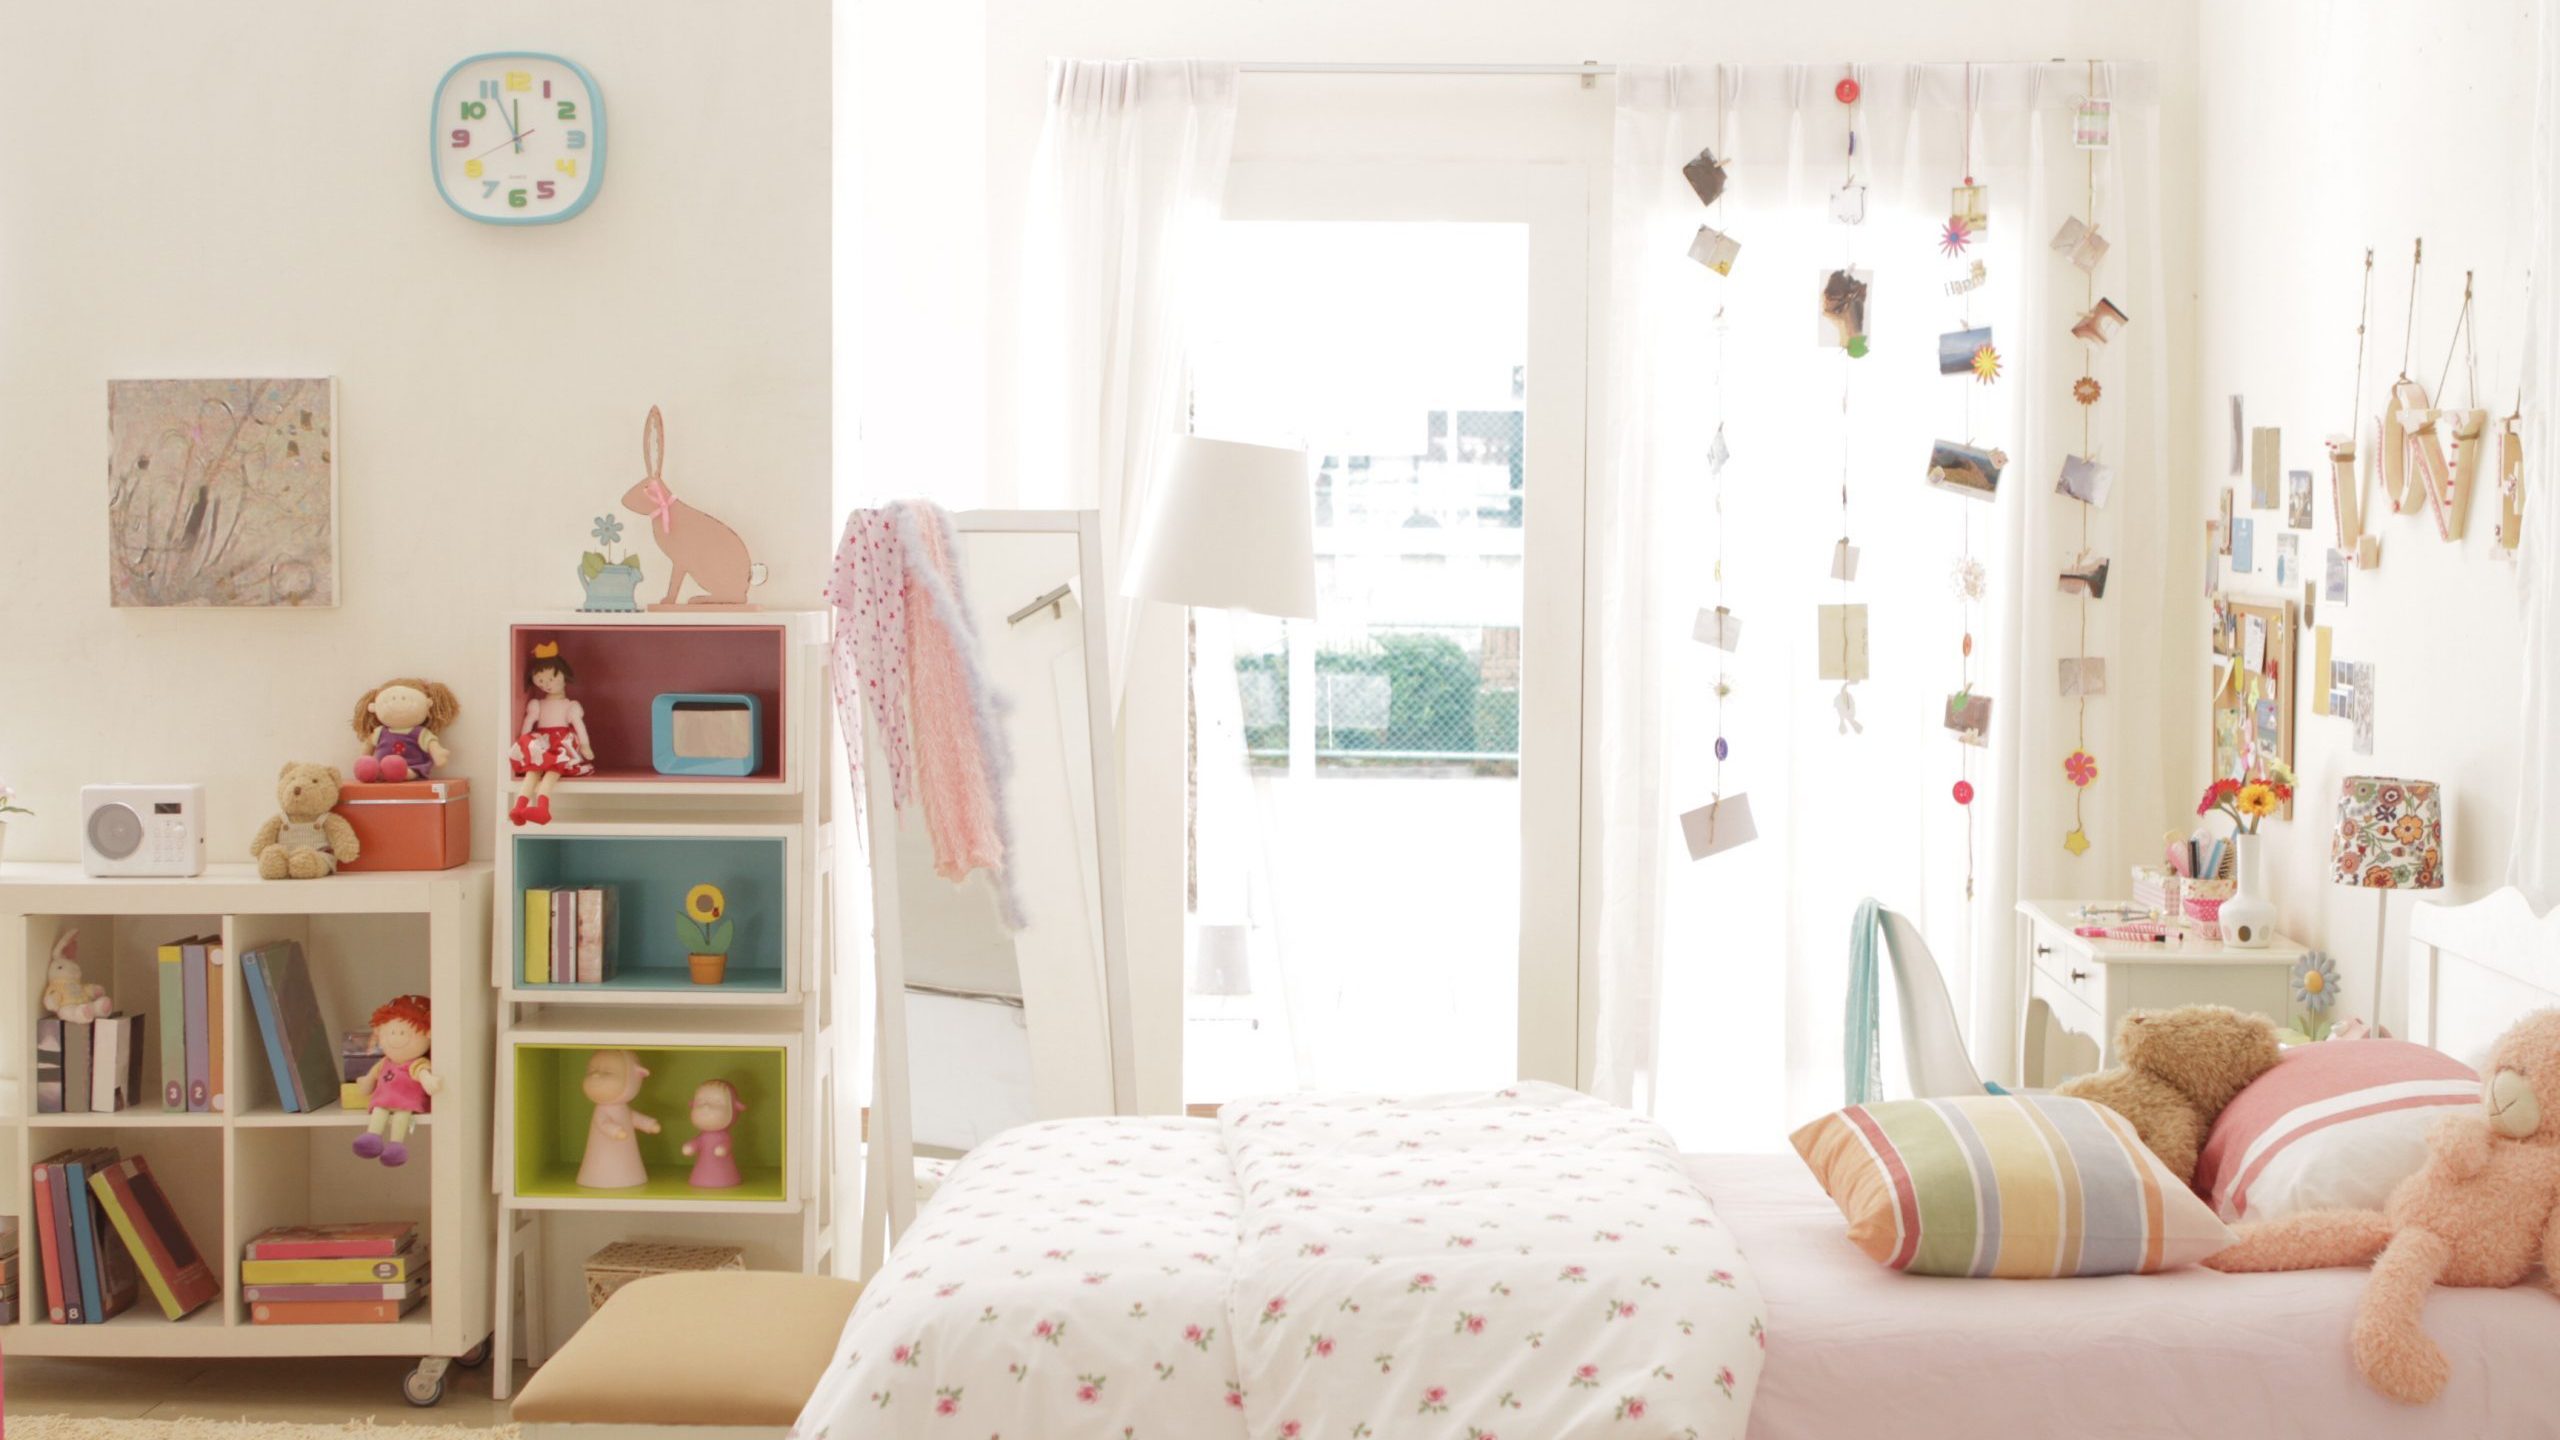 10 fun decorating ideas for teenage bedrooms